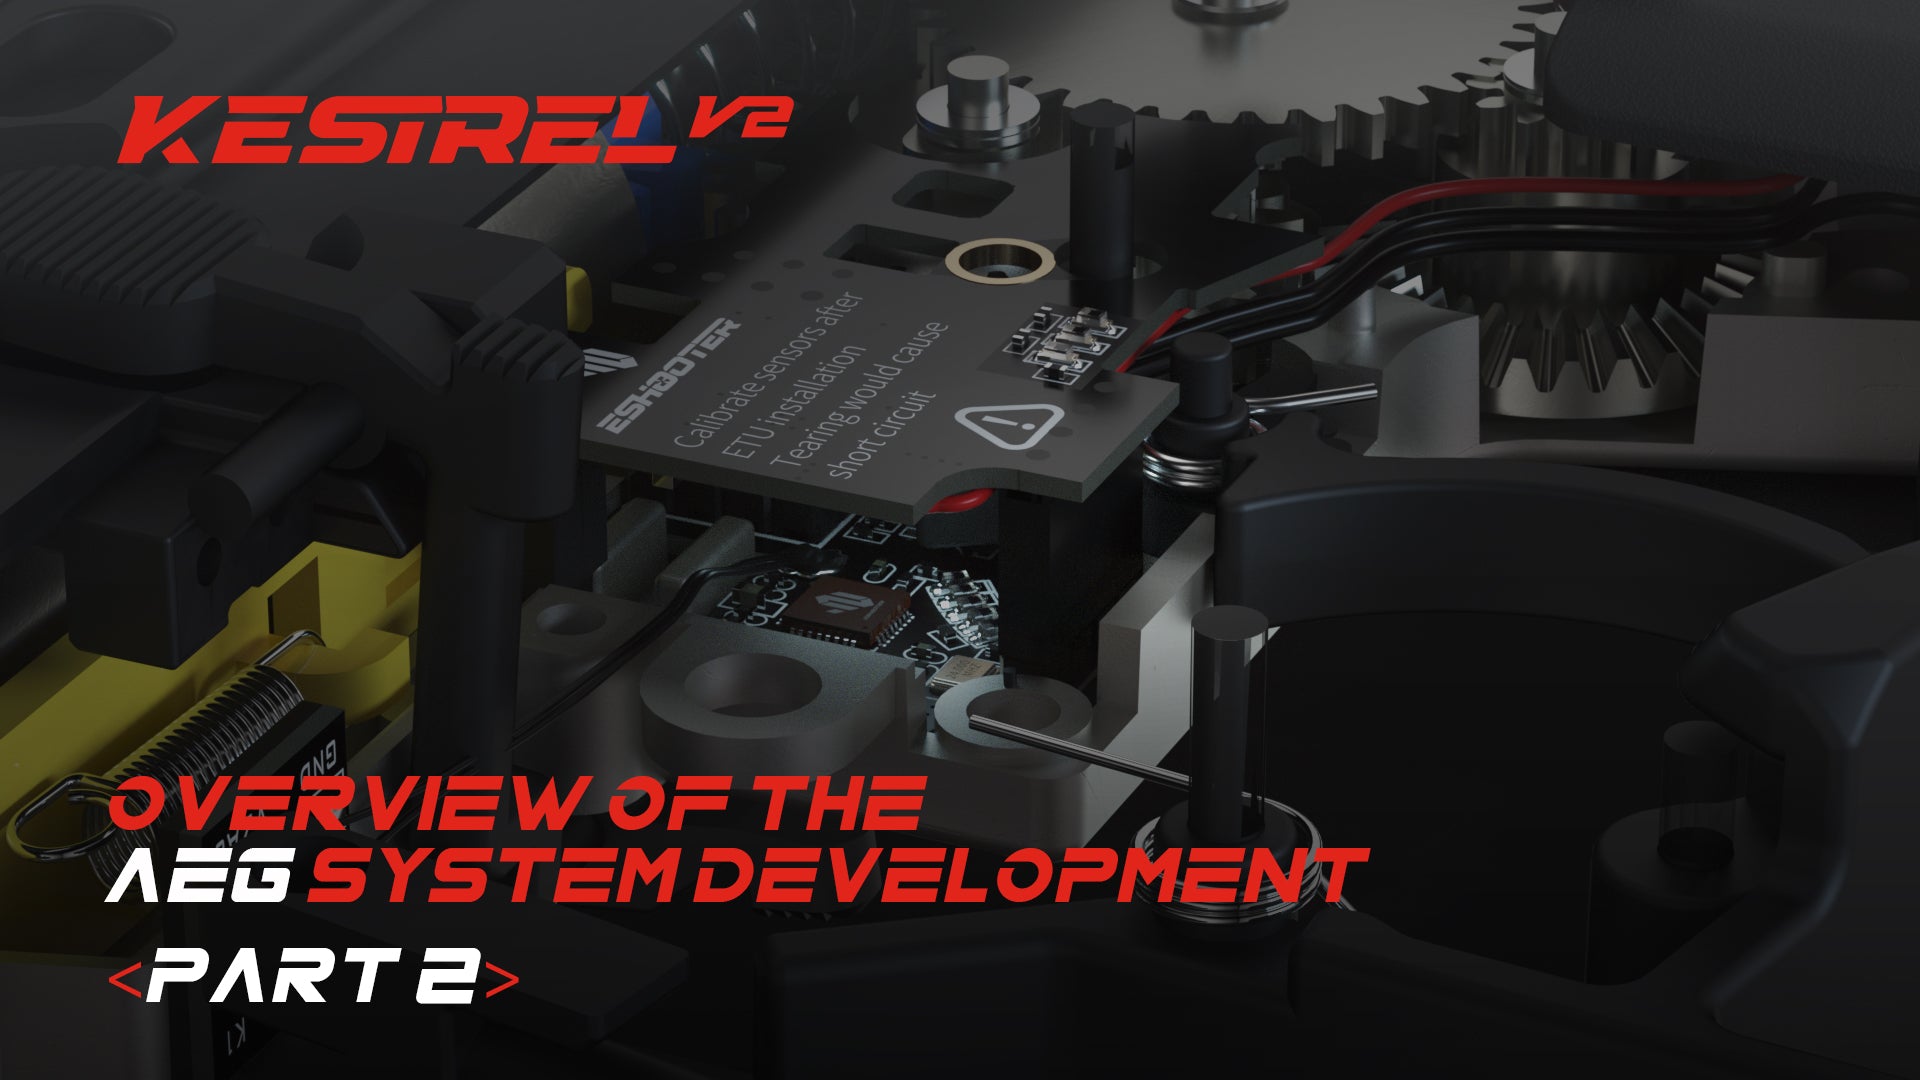 Overview of the AEG System Development <Part 2>